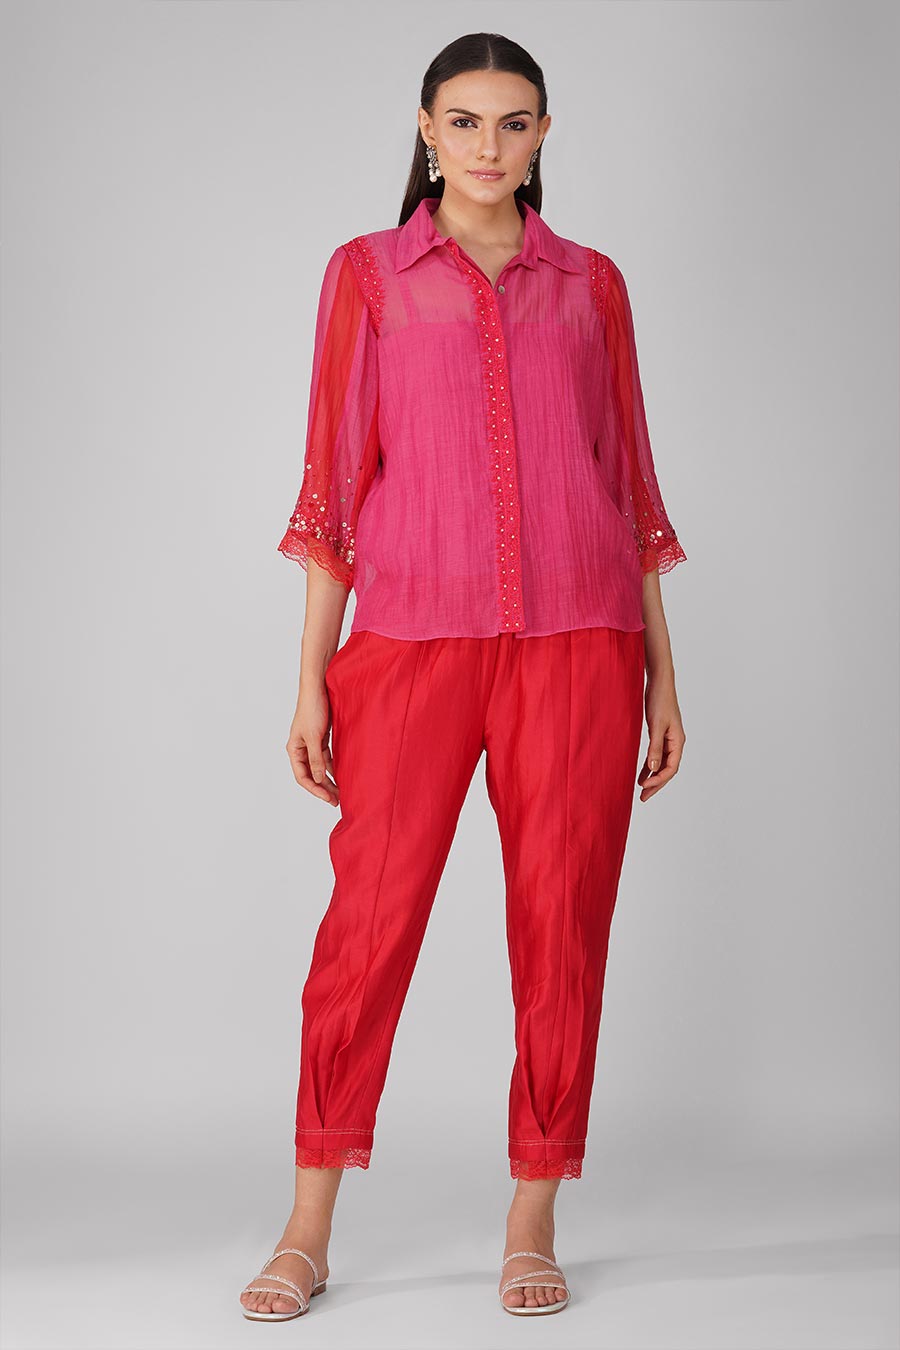 Red-Pink Embroidered Shirt Set